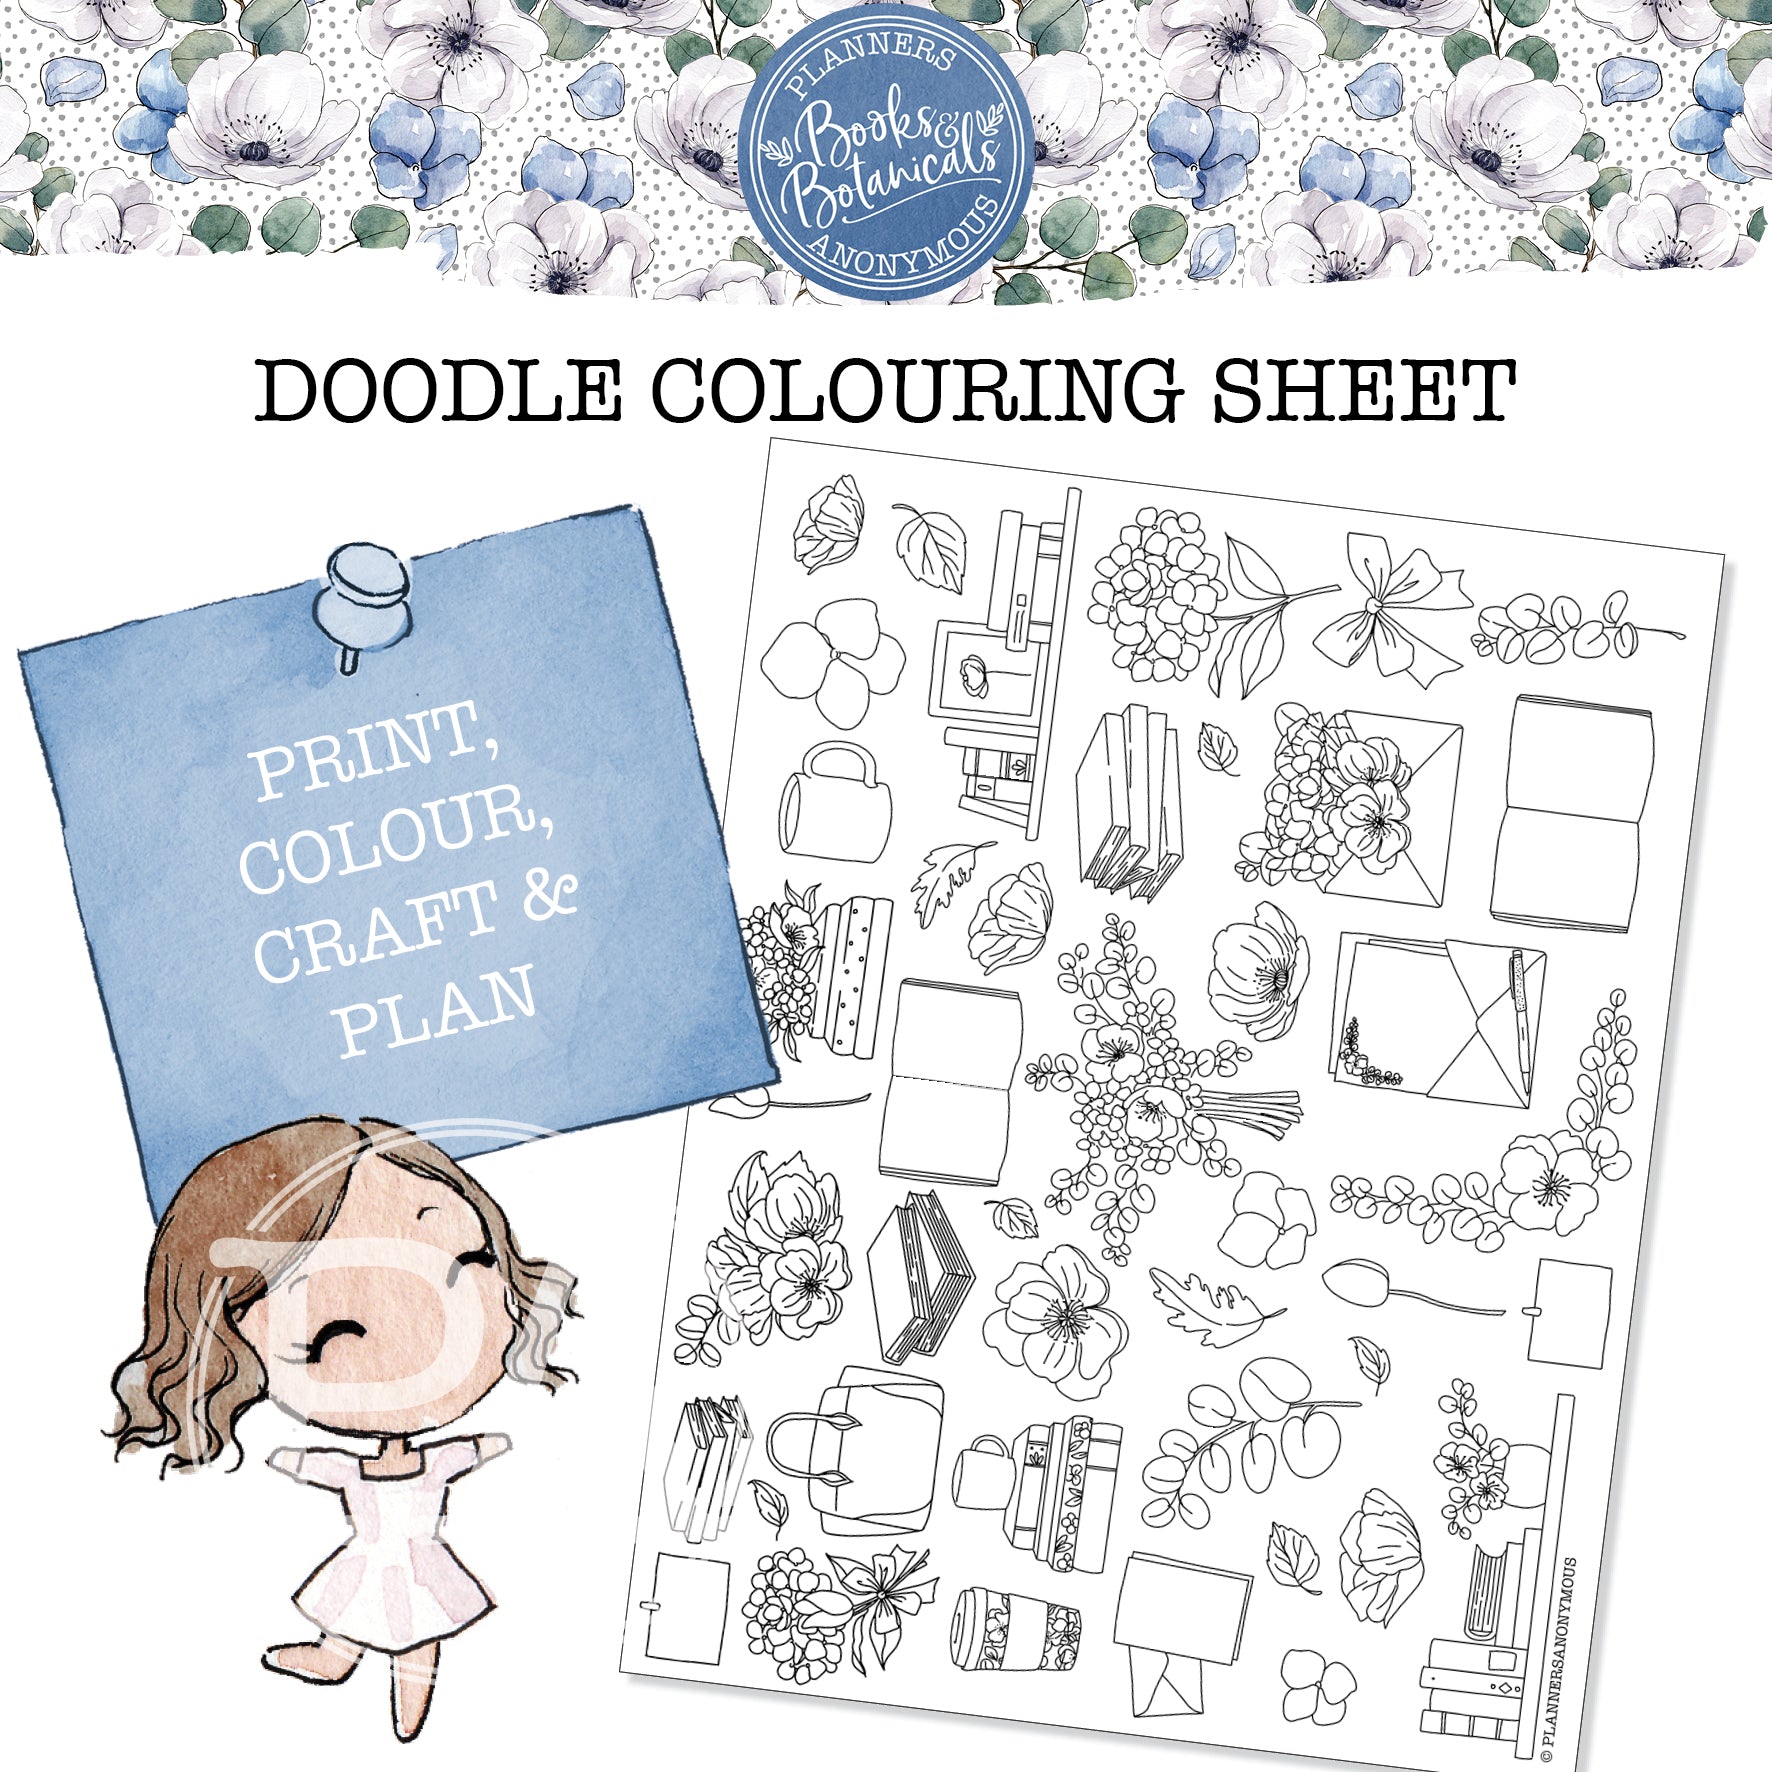 Books and Botanicals Colouring Sheet